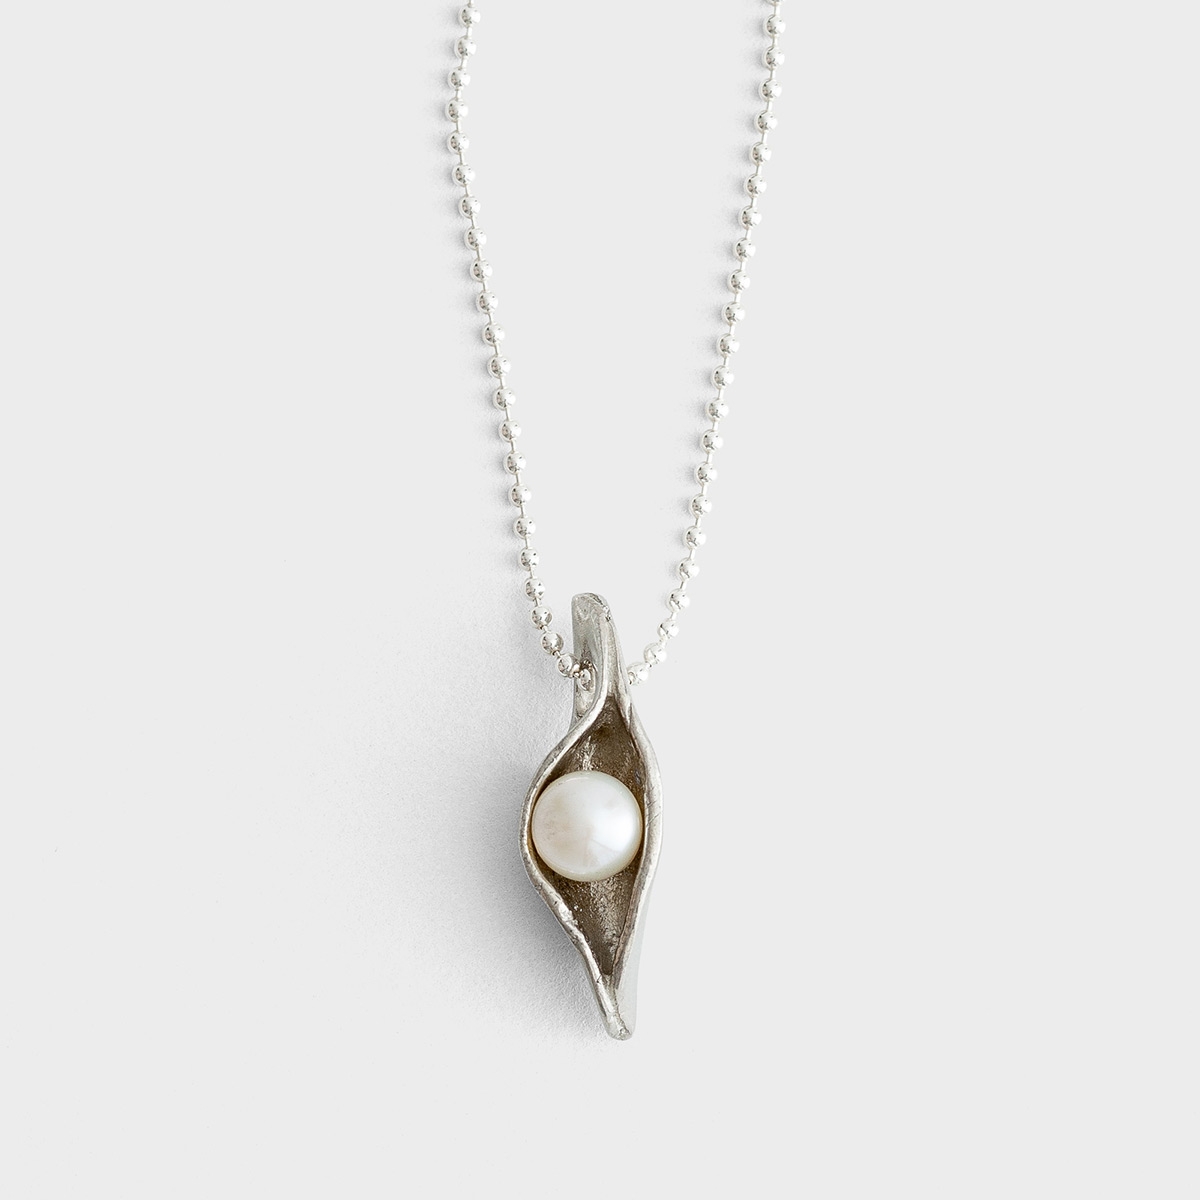 One Sweet Pea in a Pod - Pewter Pendant Necklace